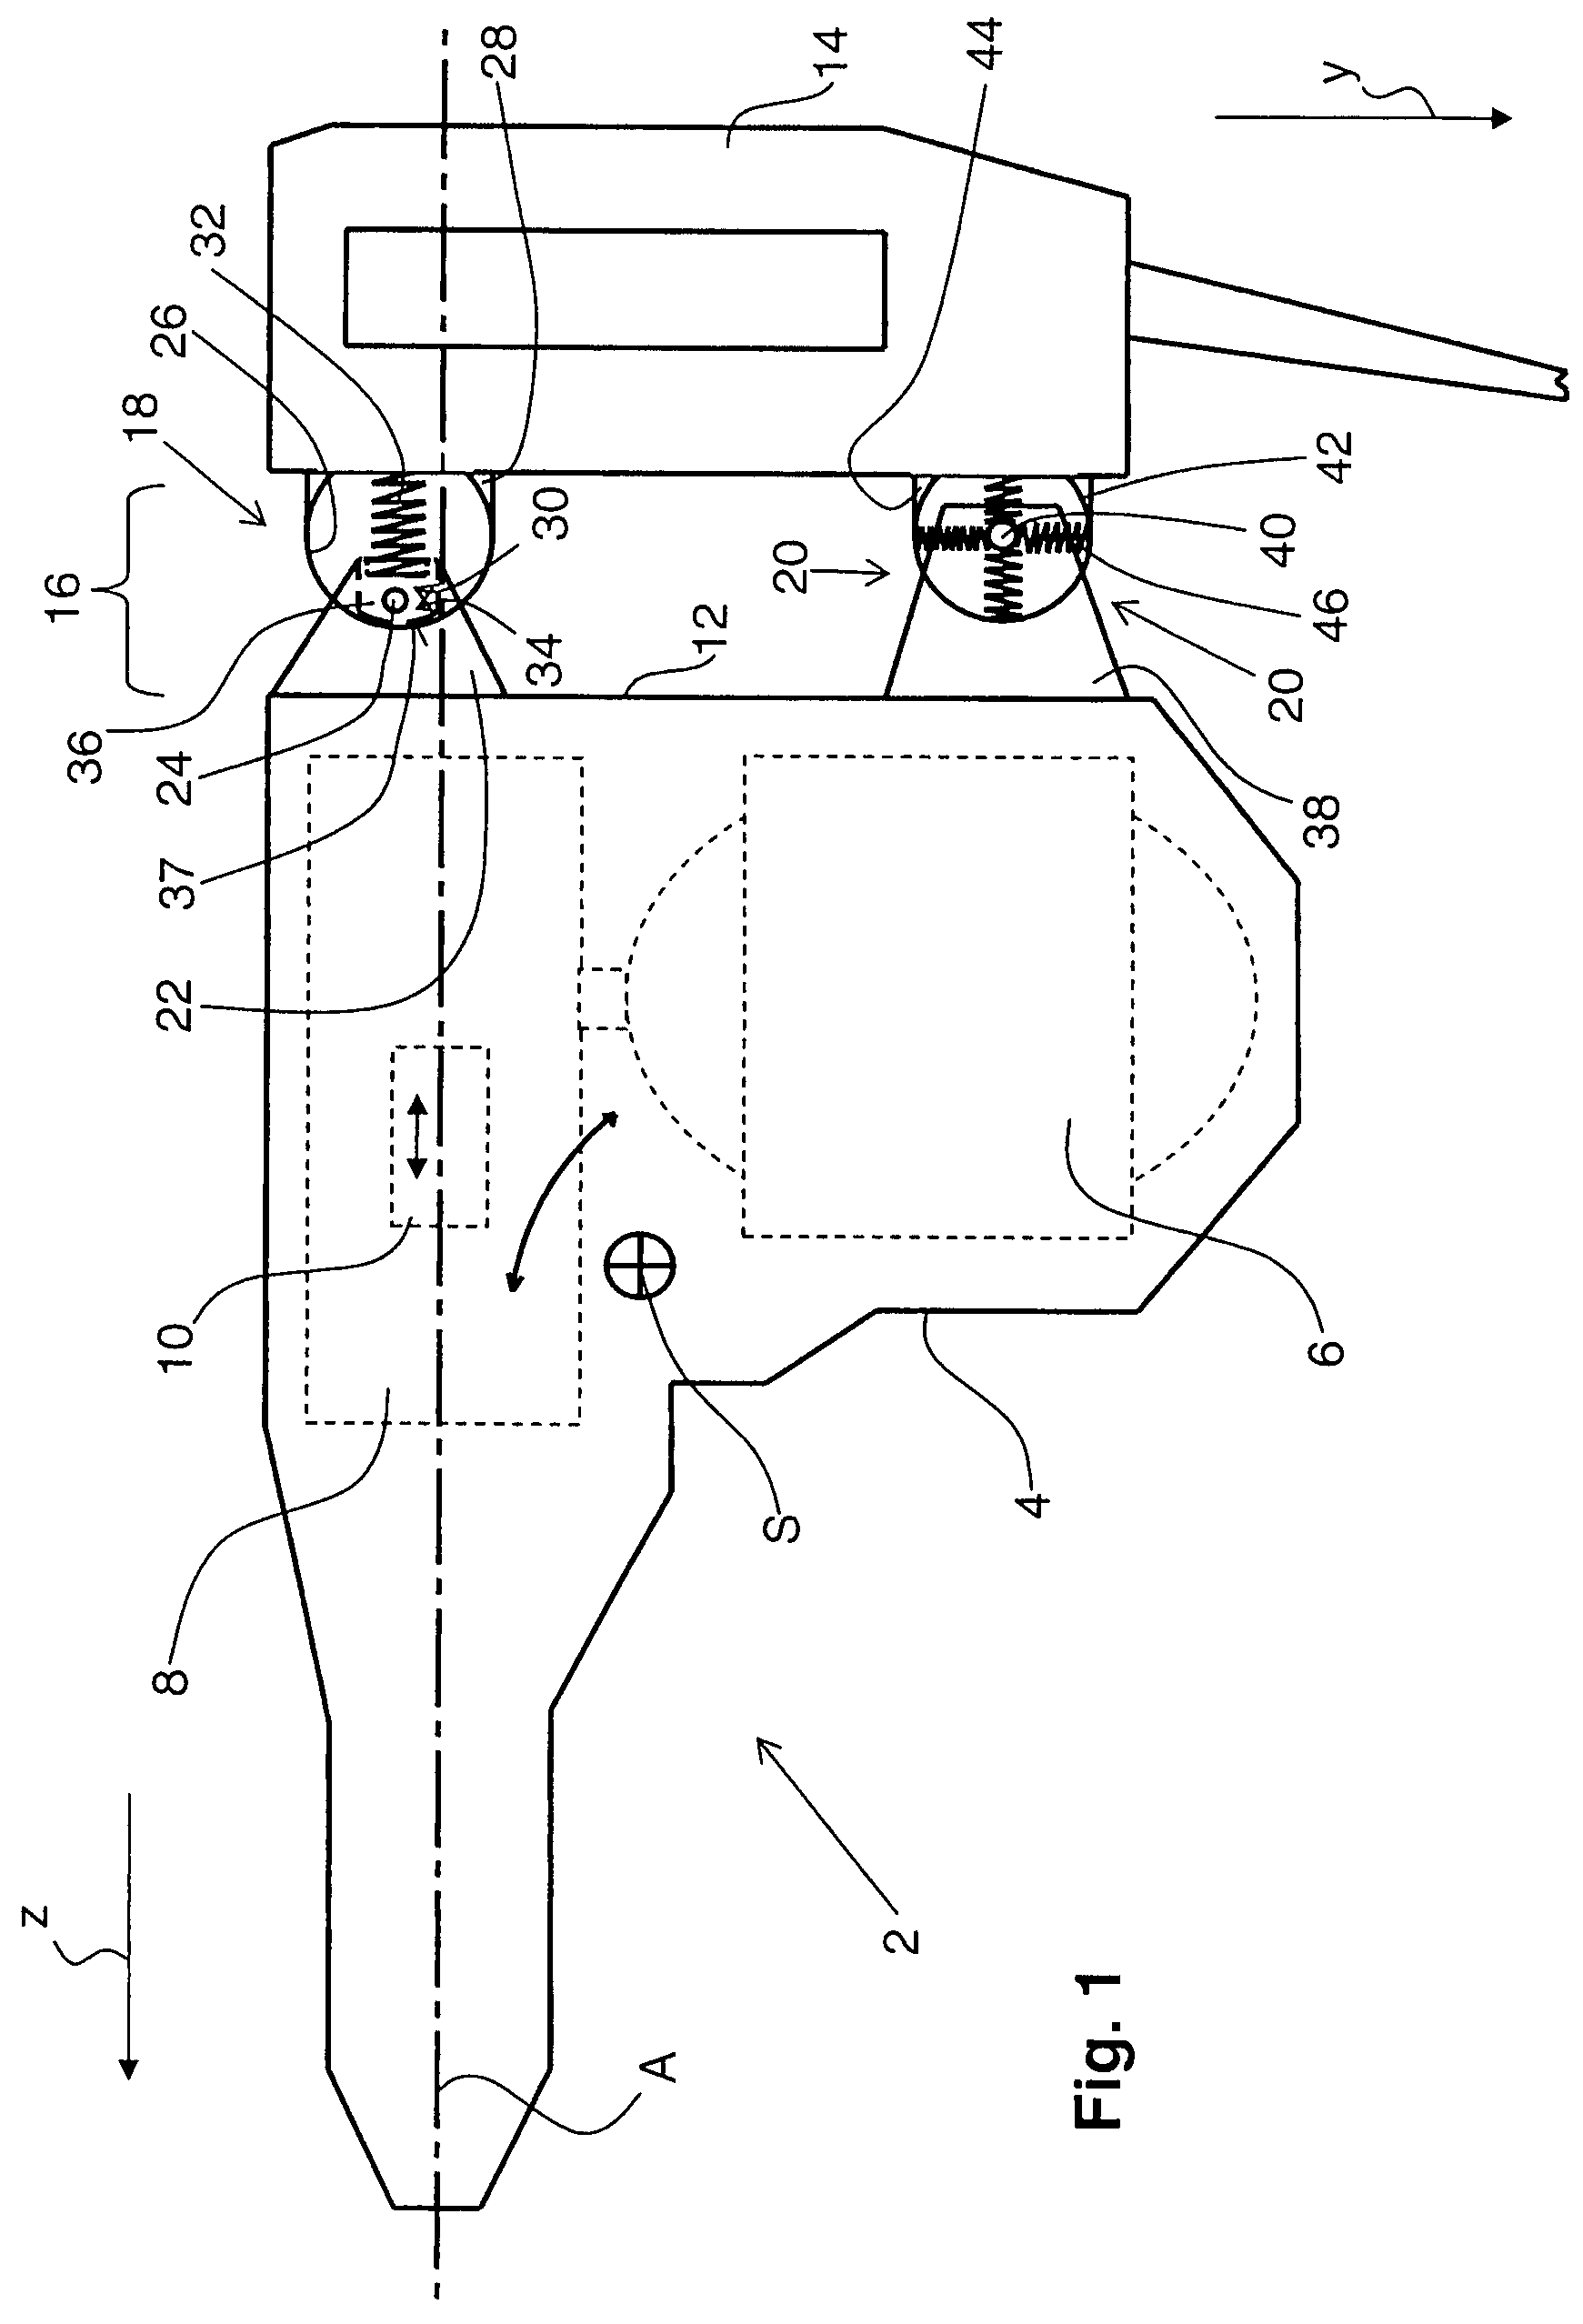 Hand-held power tool with a decoupling device